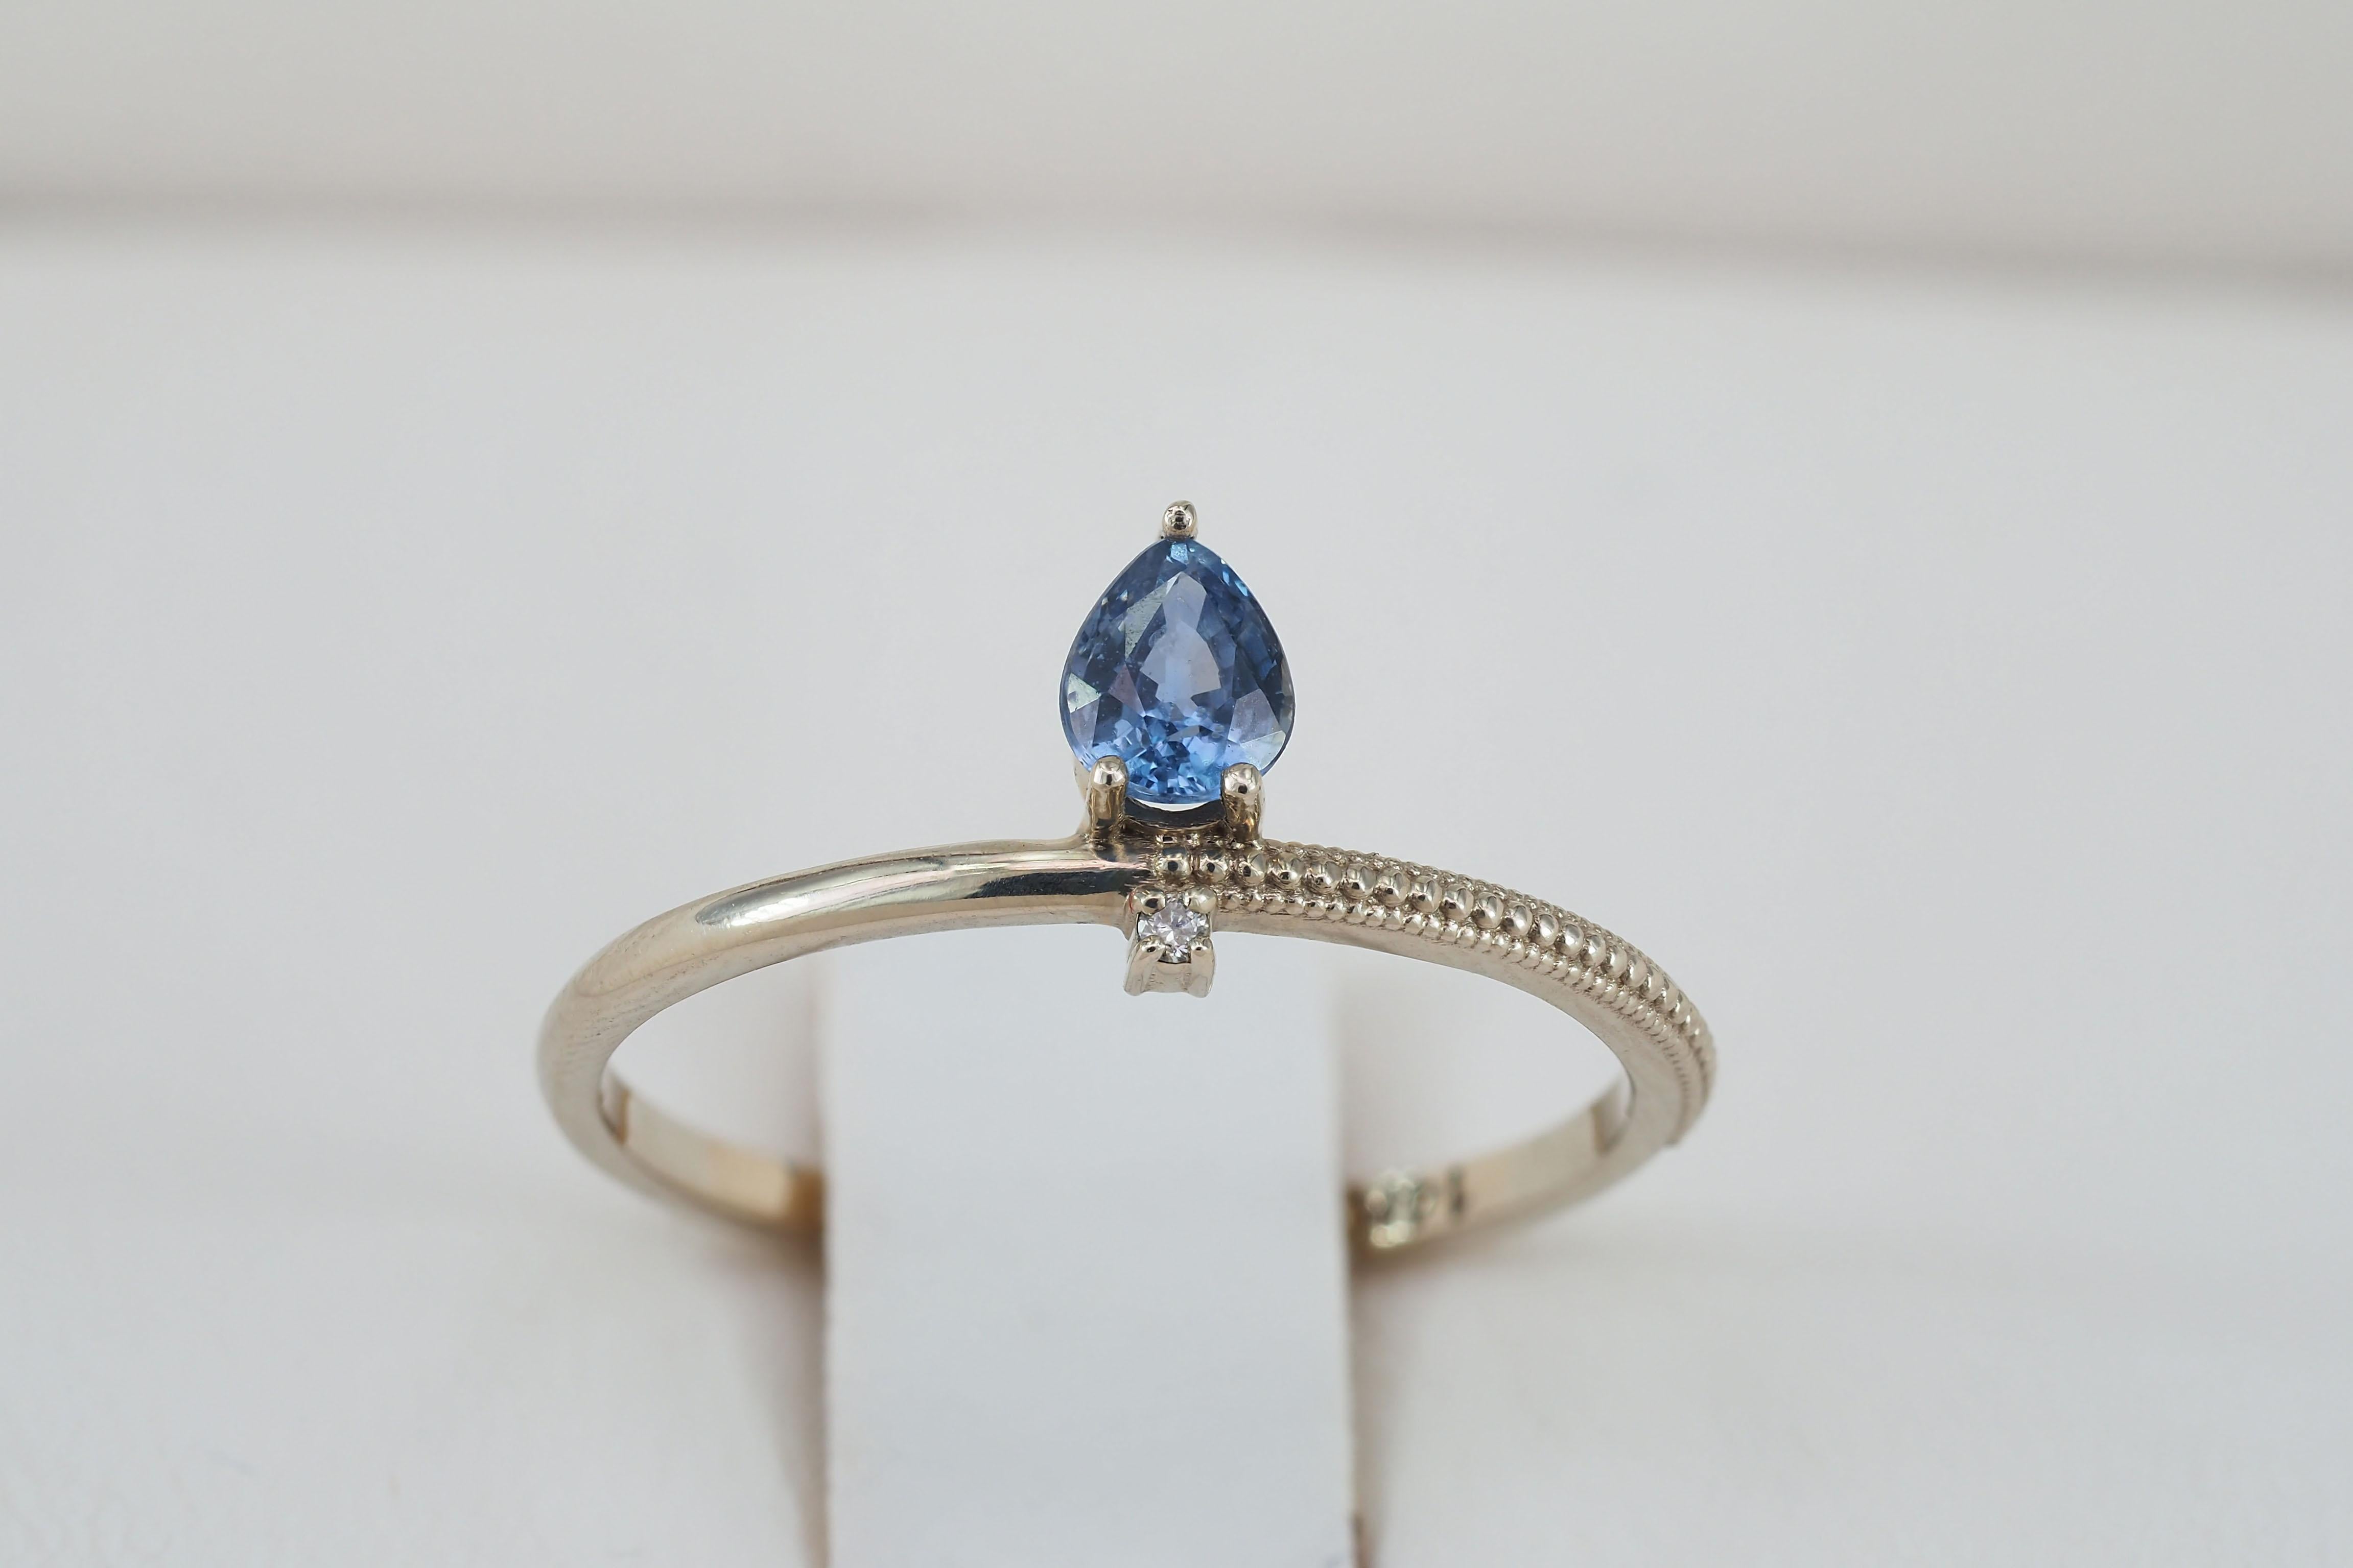 For Sale:  14k Gold Ring with Sapphire and Diamond 7